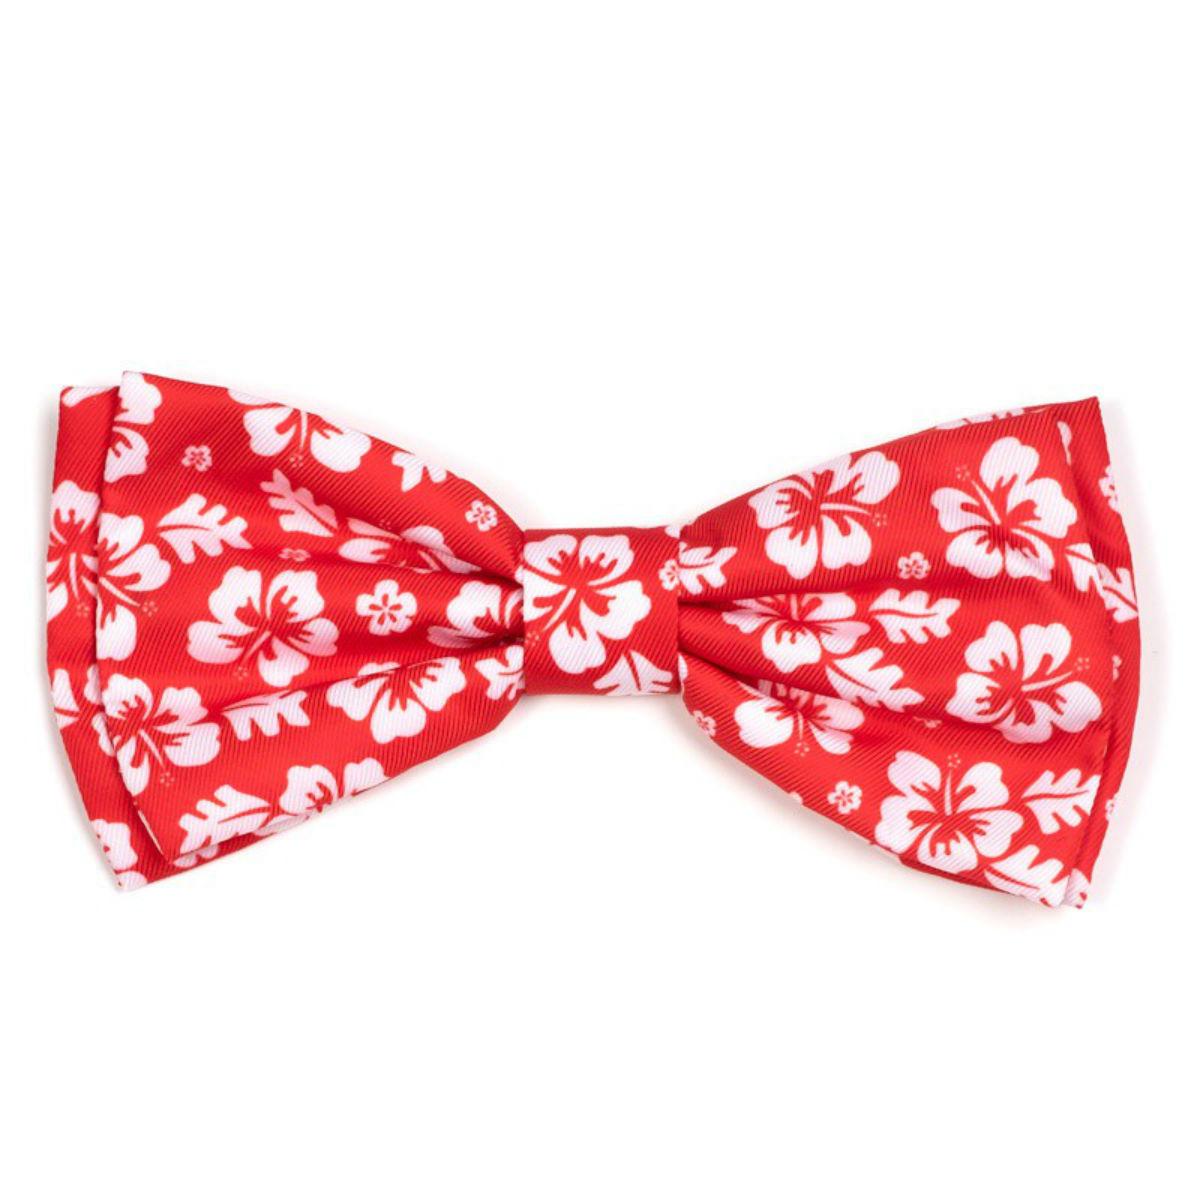 Worthy Dog Aloha Coral Dog and Cat Bow Tie Collar Attachment